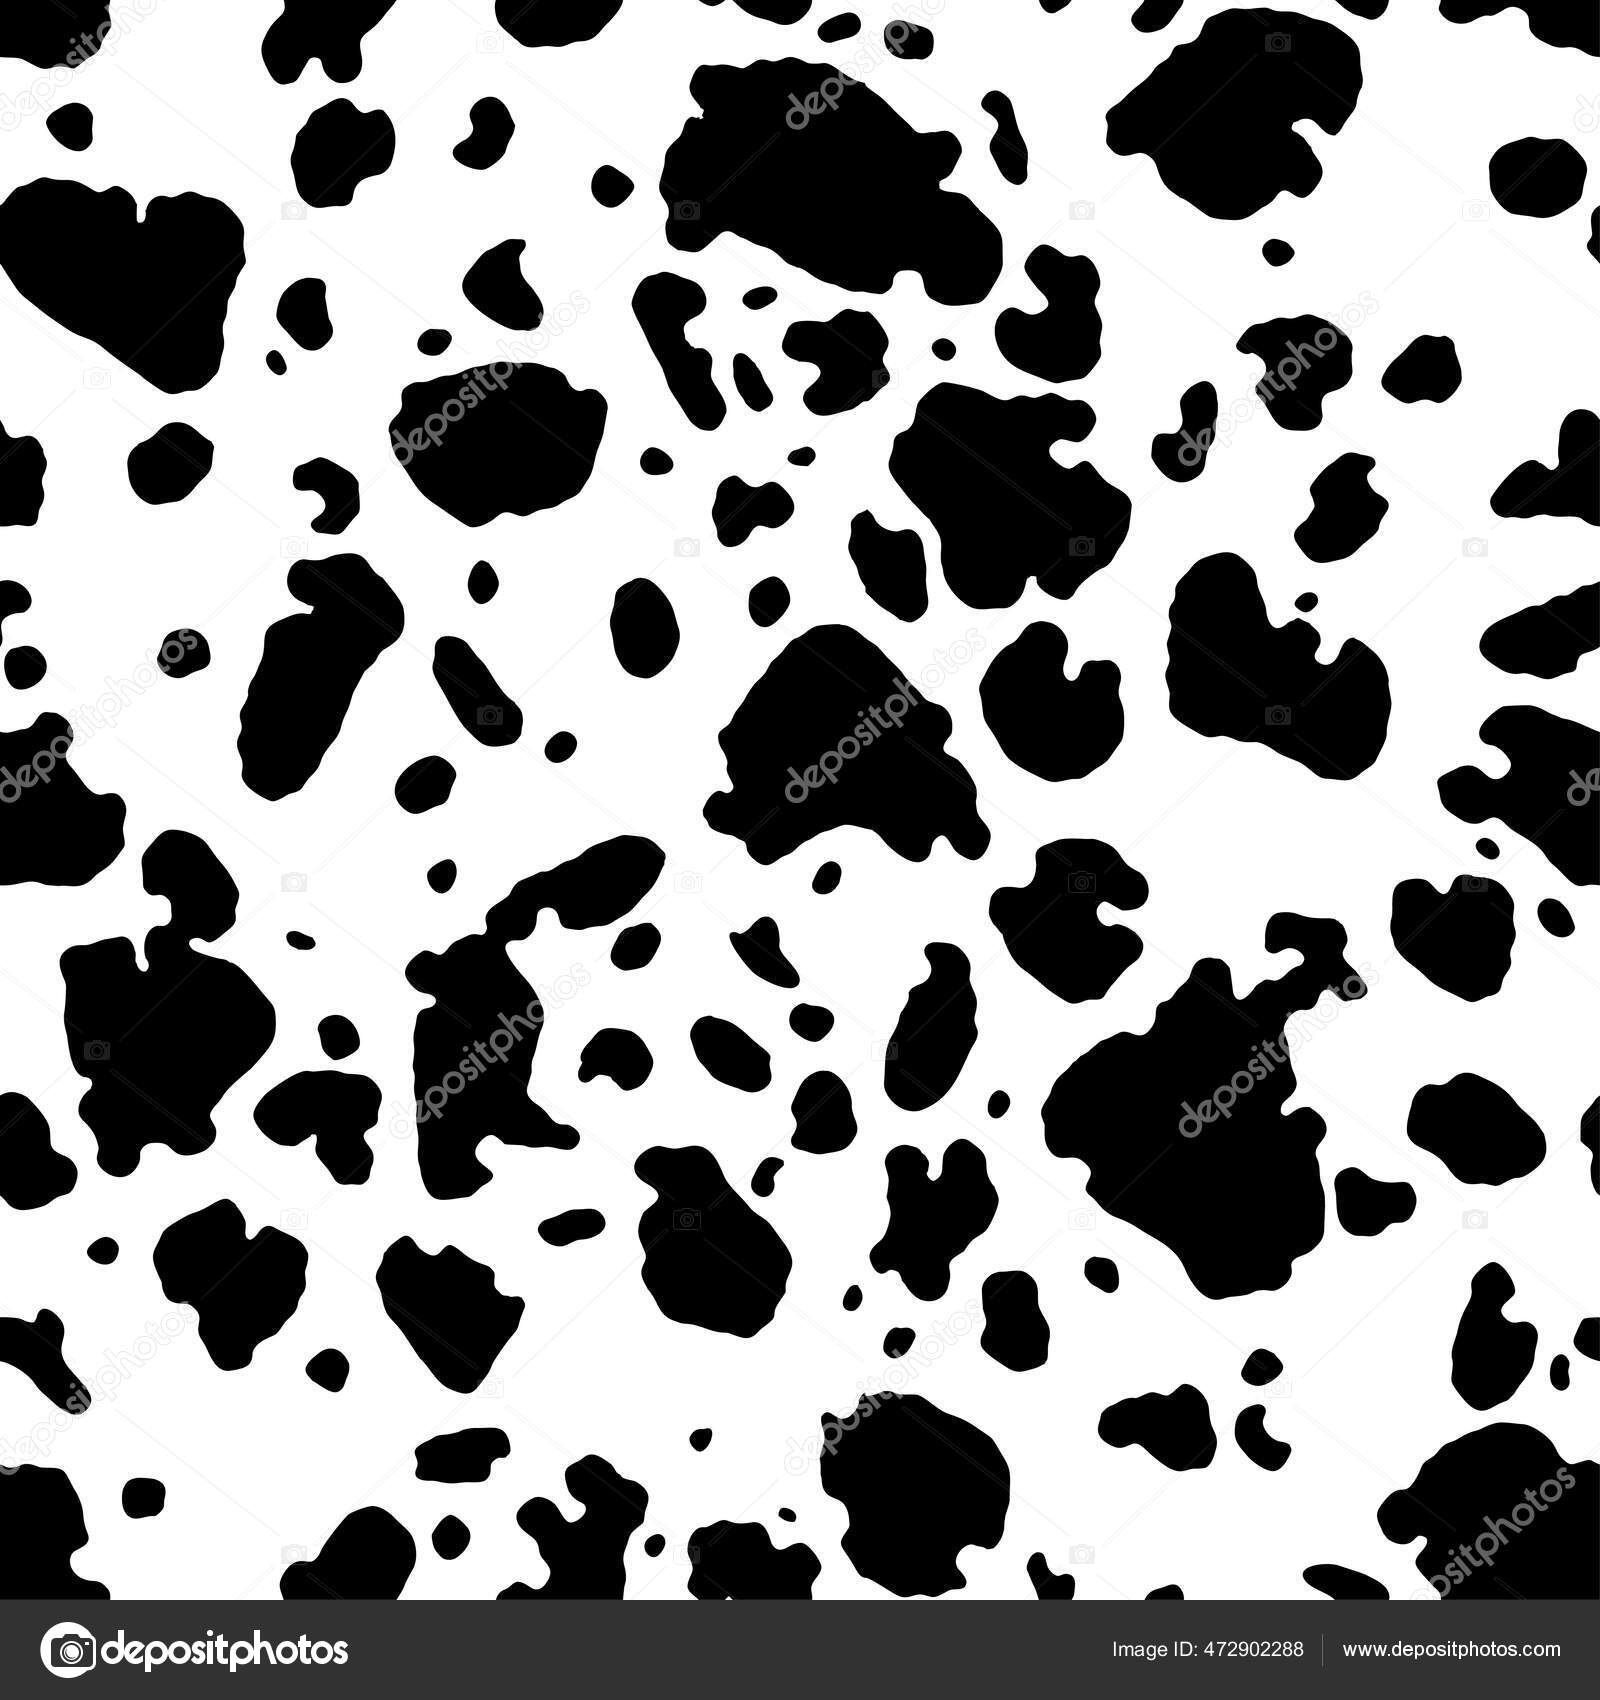 100+] Cow Print Wallpapers